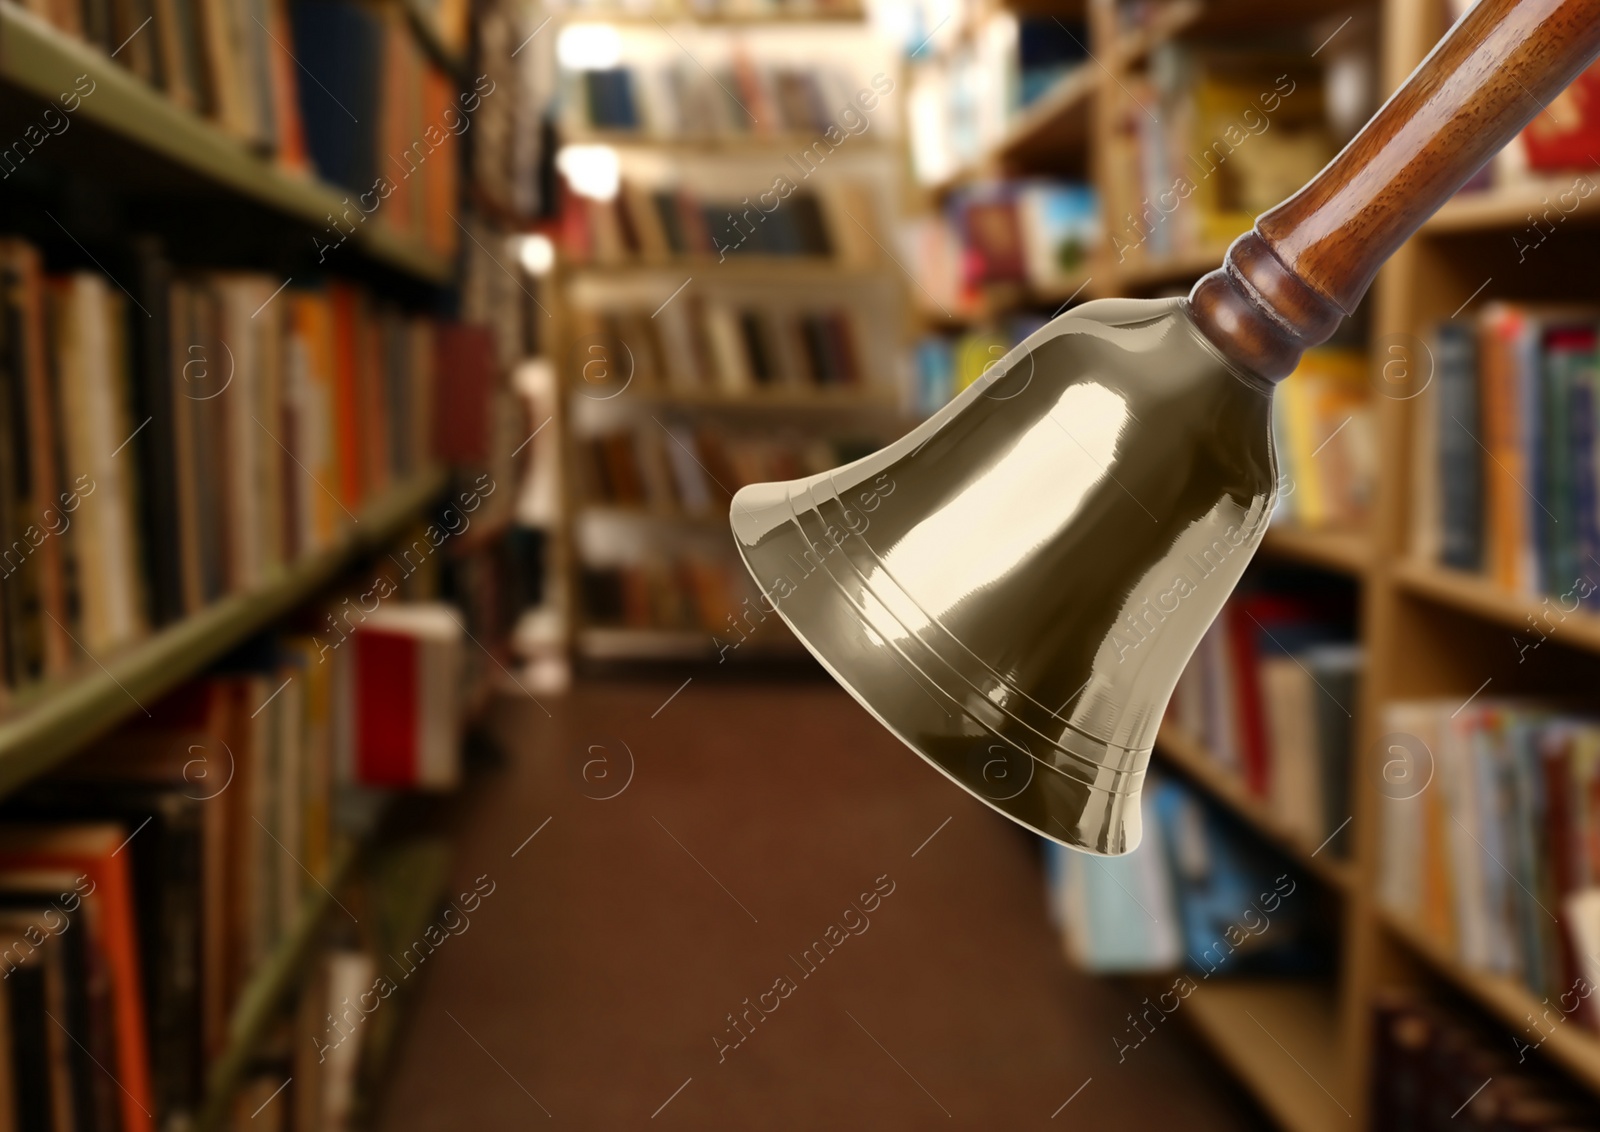 Image of Golden school bell with wooden handle and blurred view of books on shelves in library